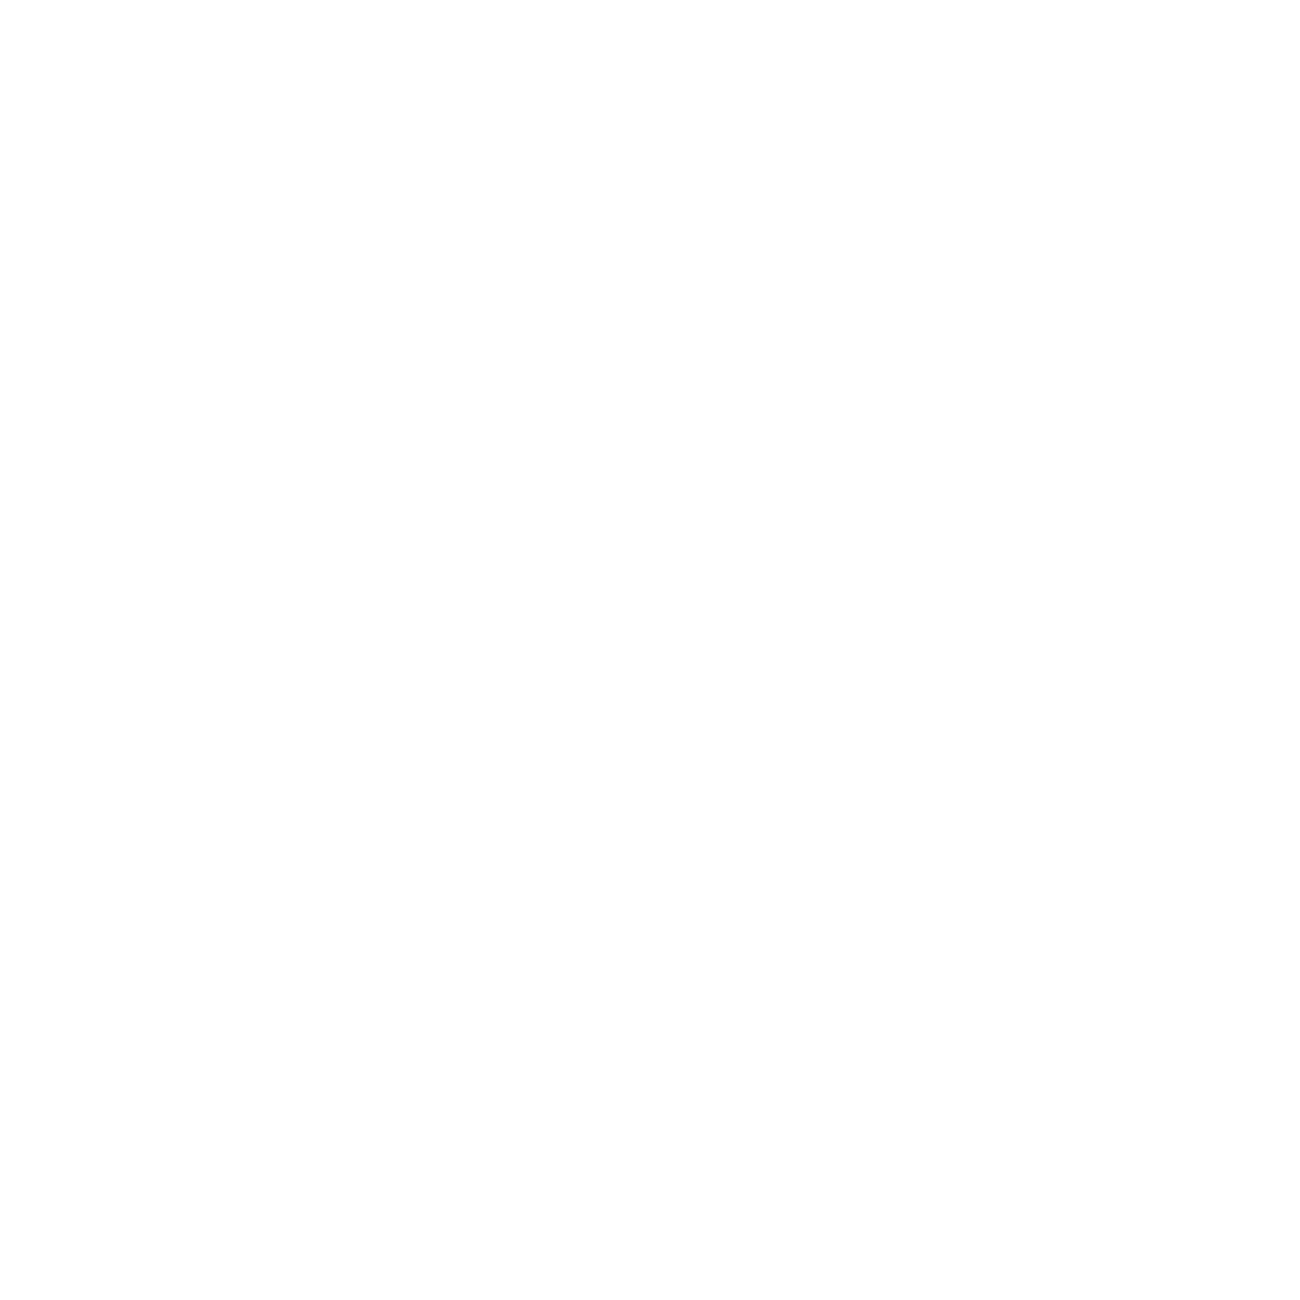 Refrence instagram account